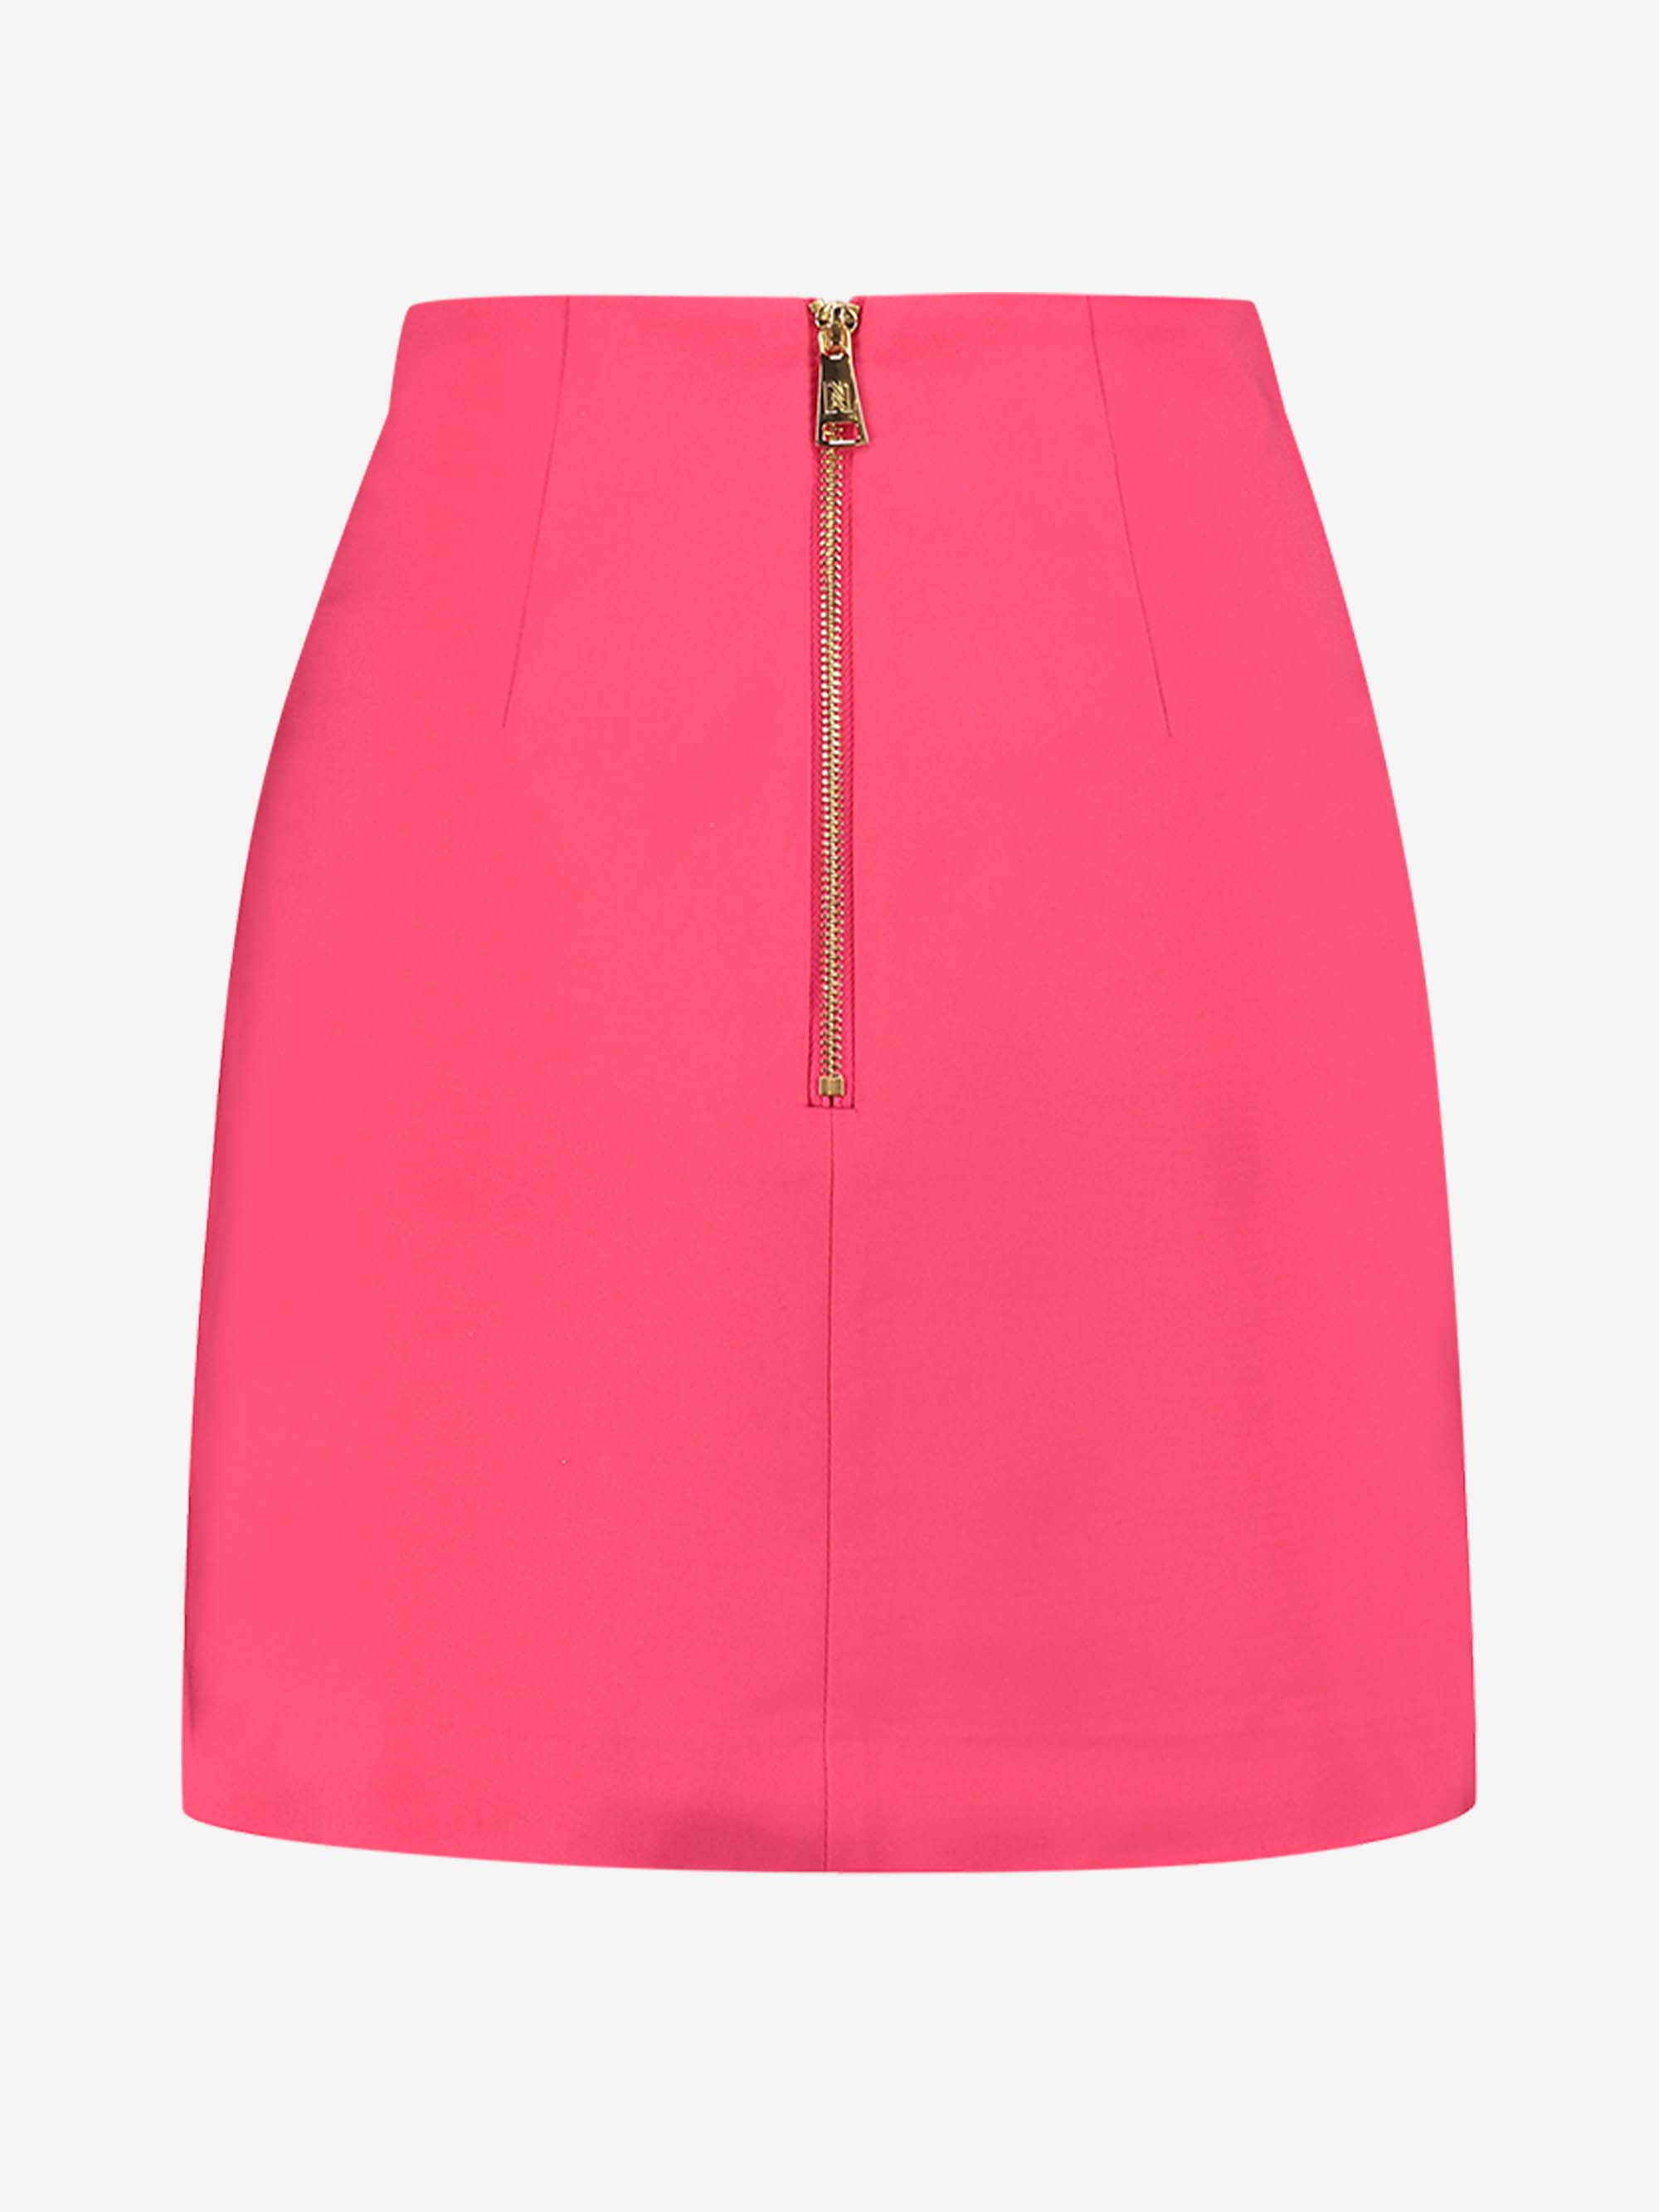 Lizzy Lace-up Skirt